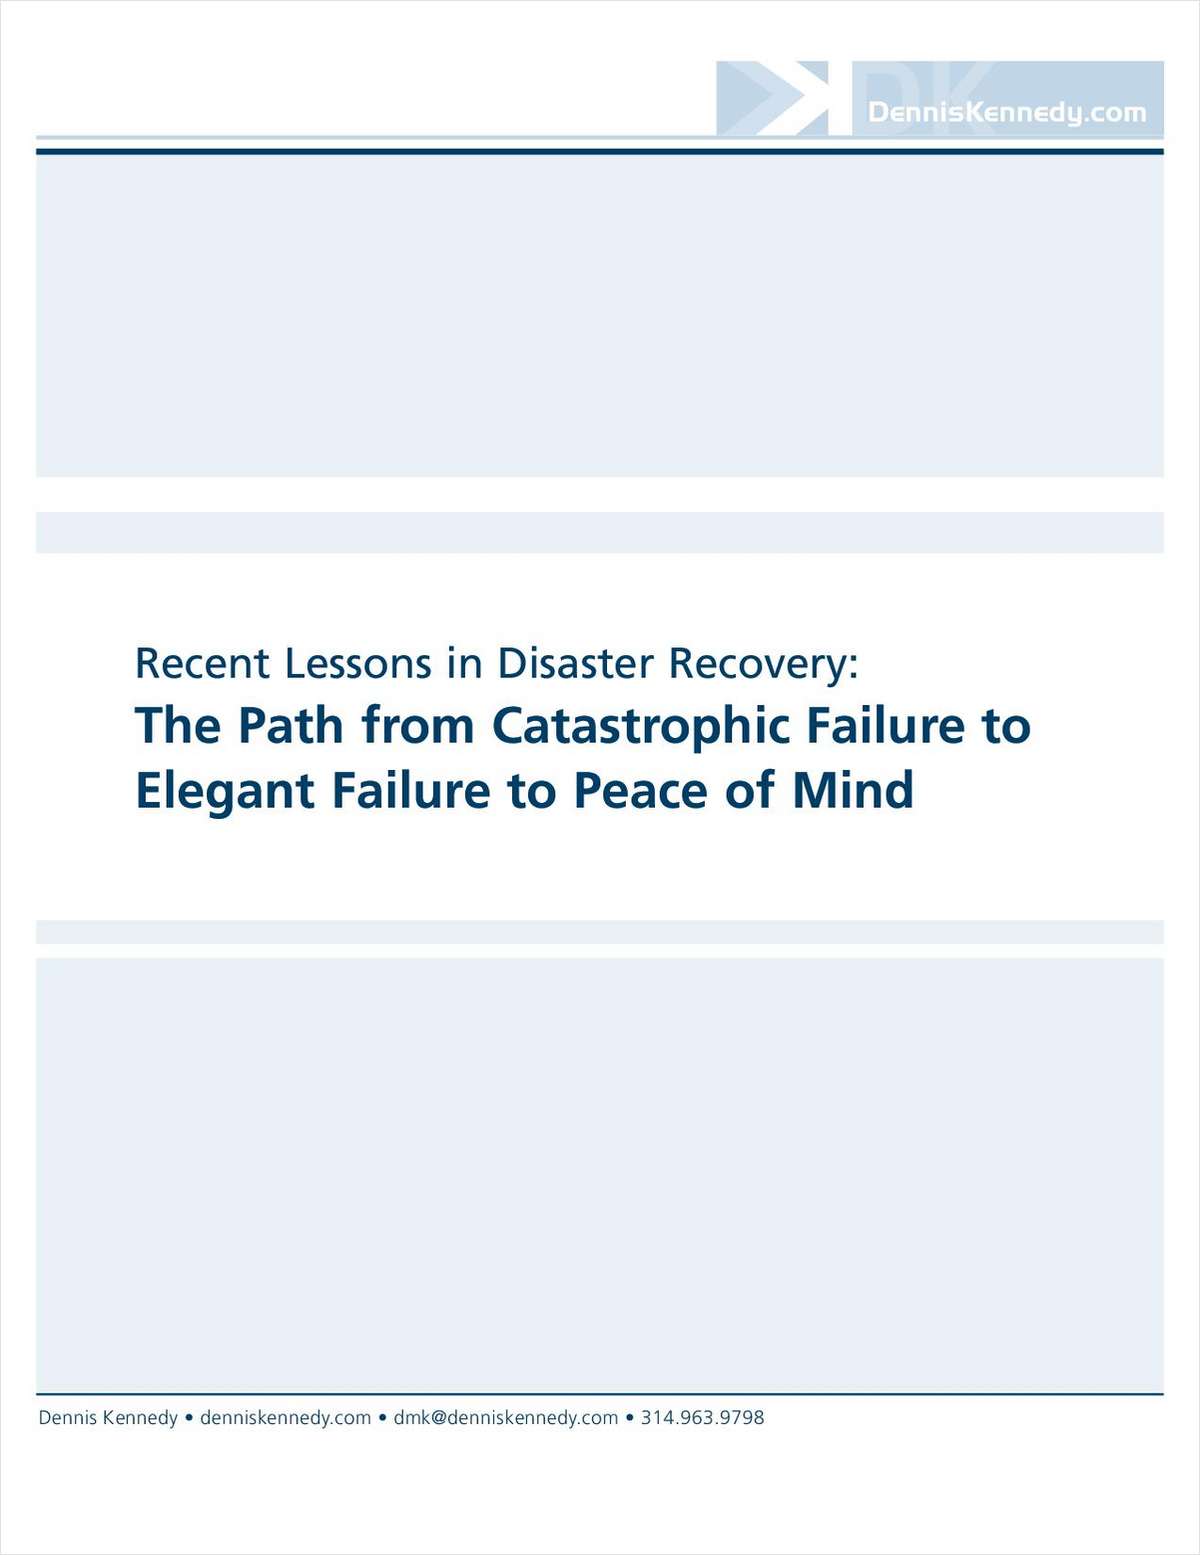 Recent Lessons in Disaster Recovery: The Path from Catastrophic Failure to Elegant Failure to Peace of Mind